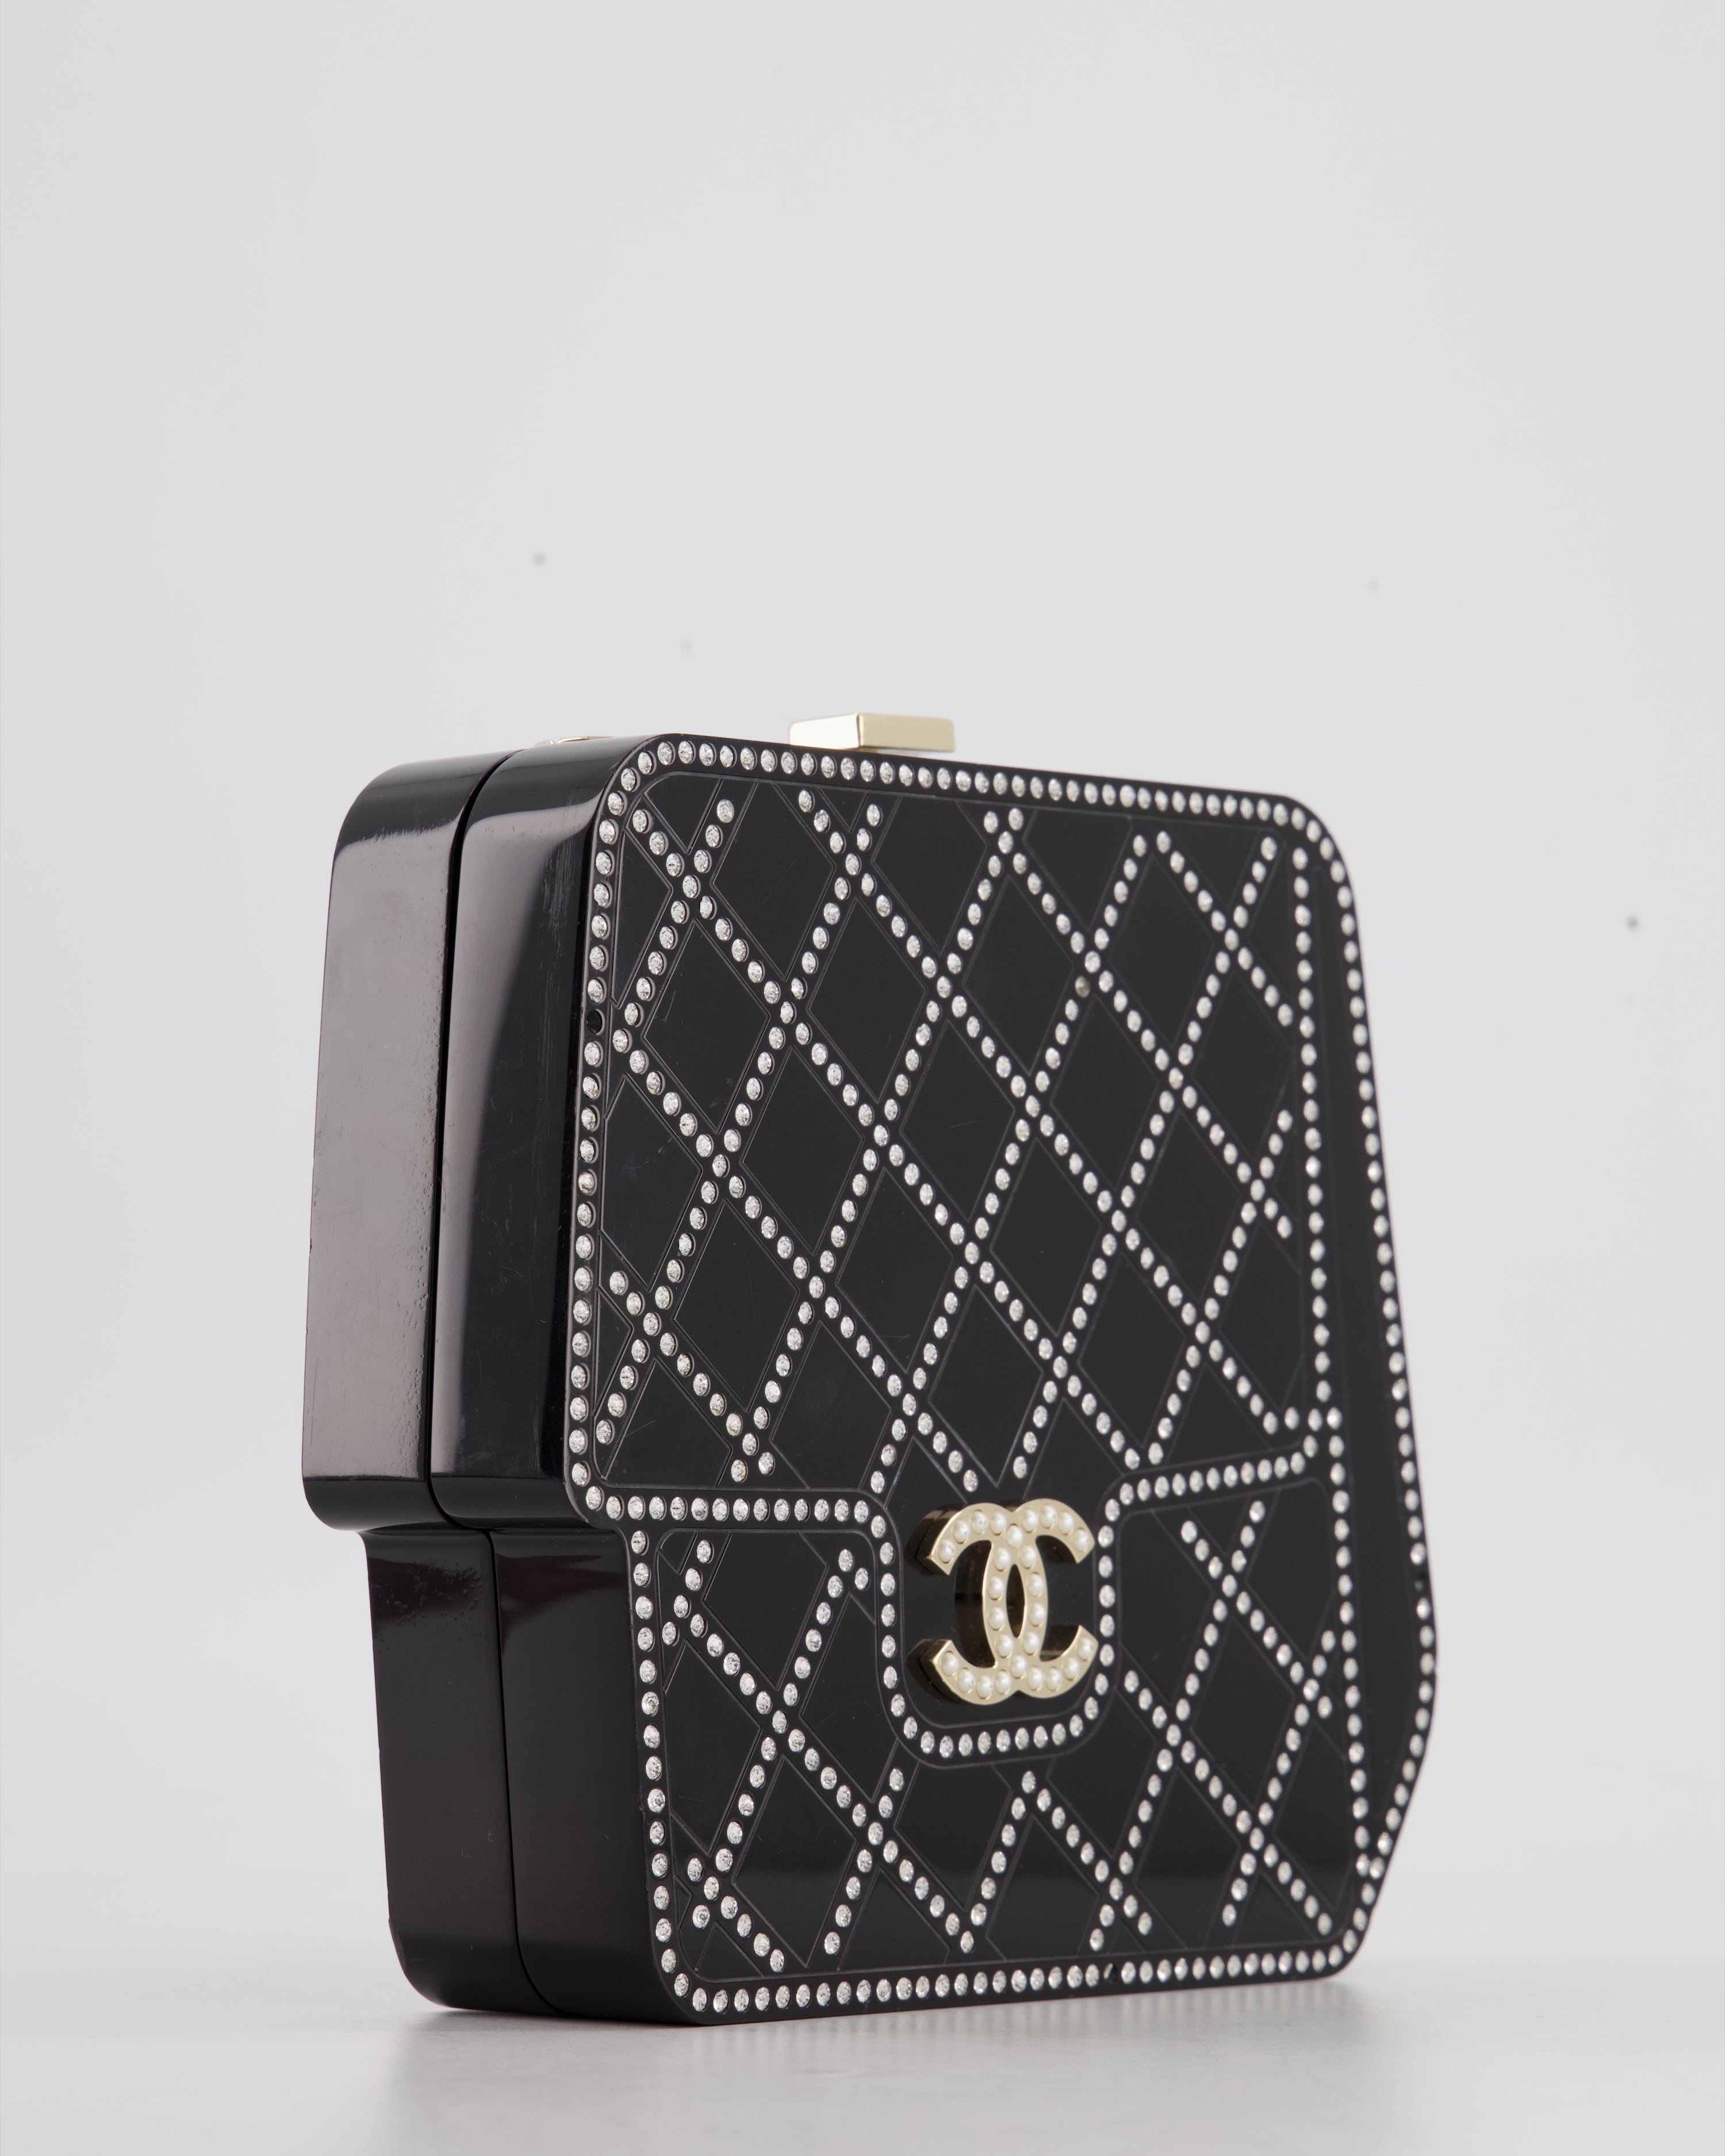 *COLLECTORS ITEM* Chanel Black Acrylic Crossbody Box Bag with Crystal with Pearl Embellishment and Champagne Gold Hardware